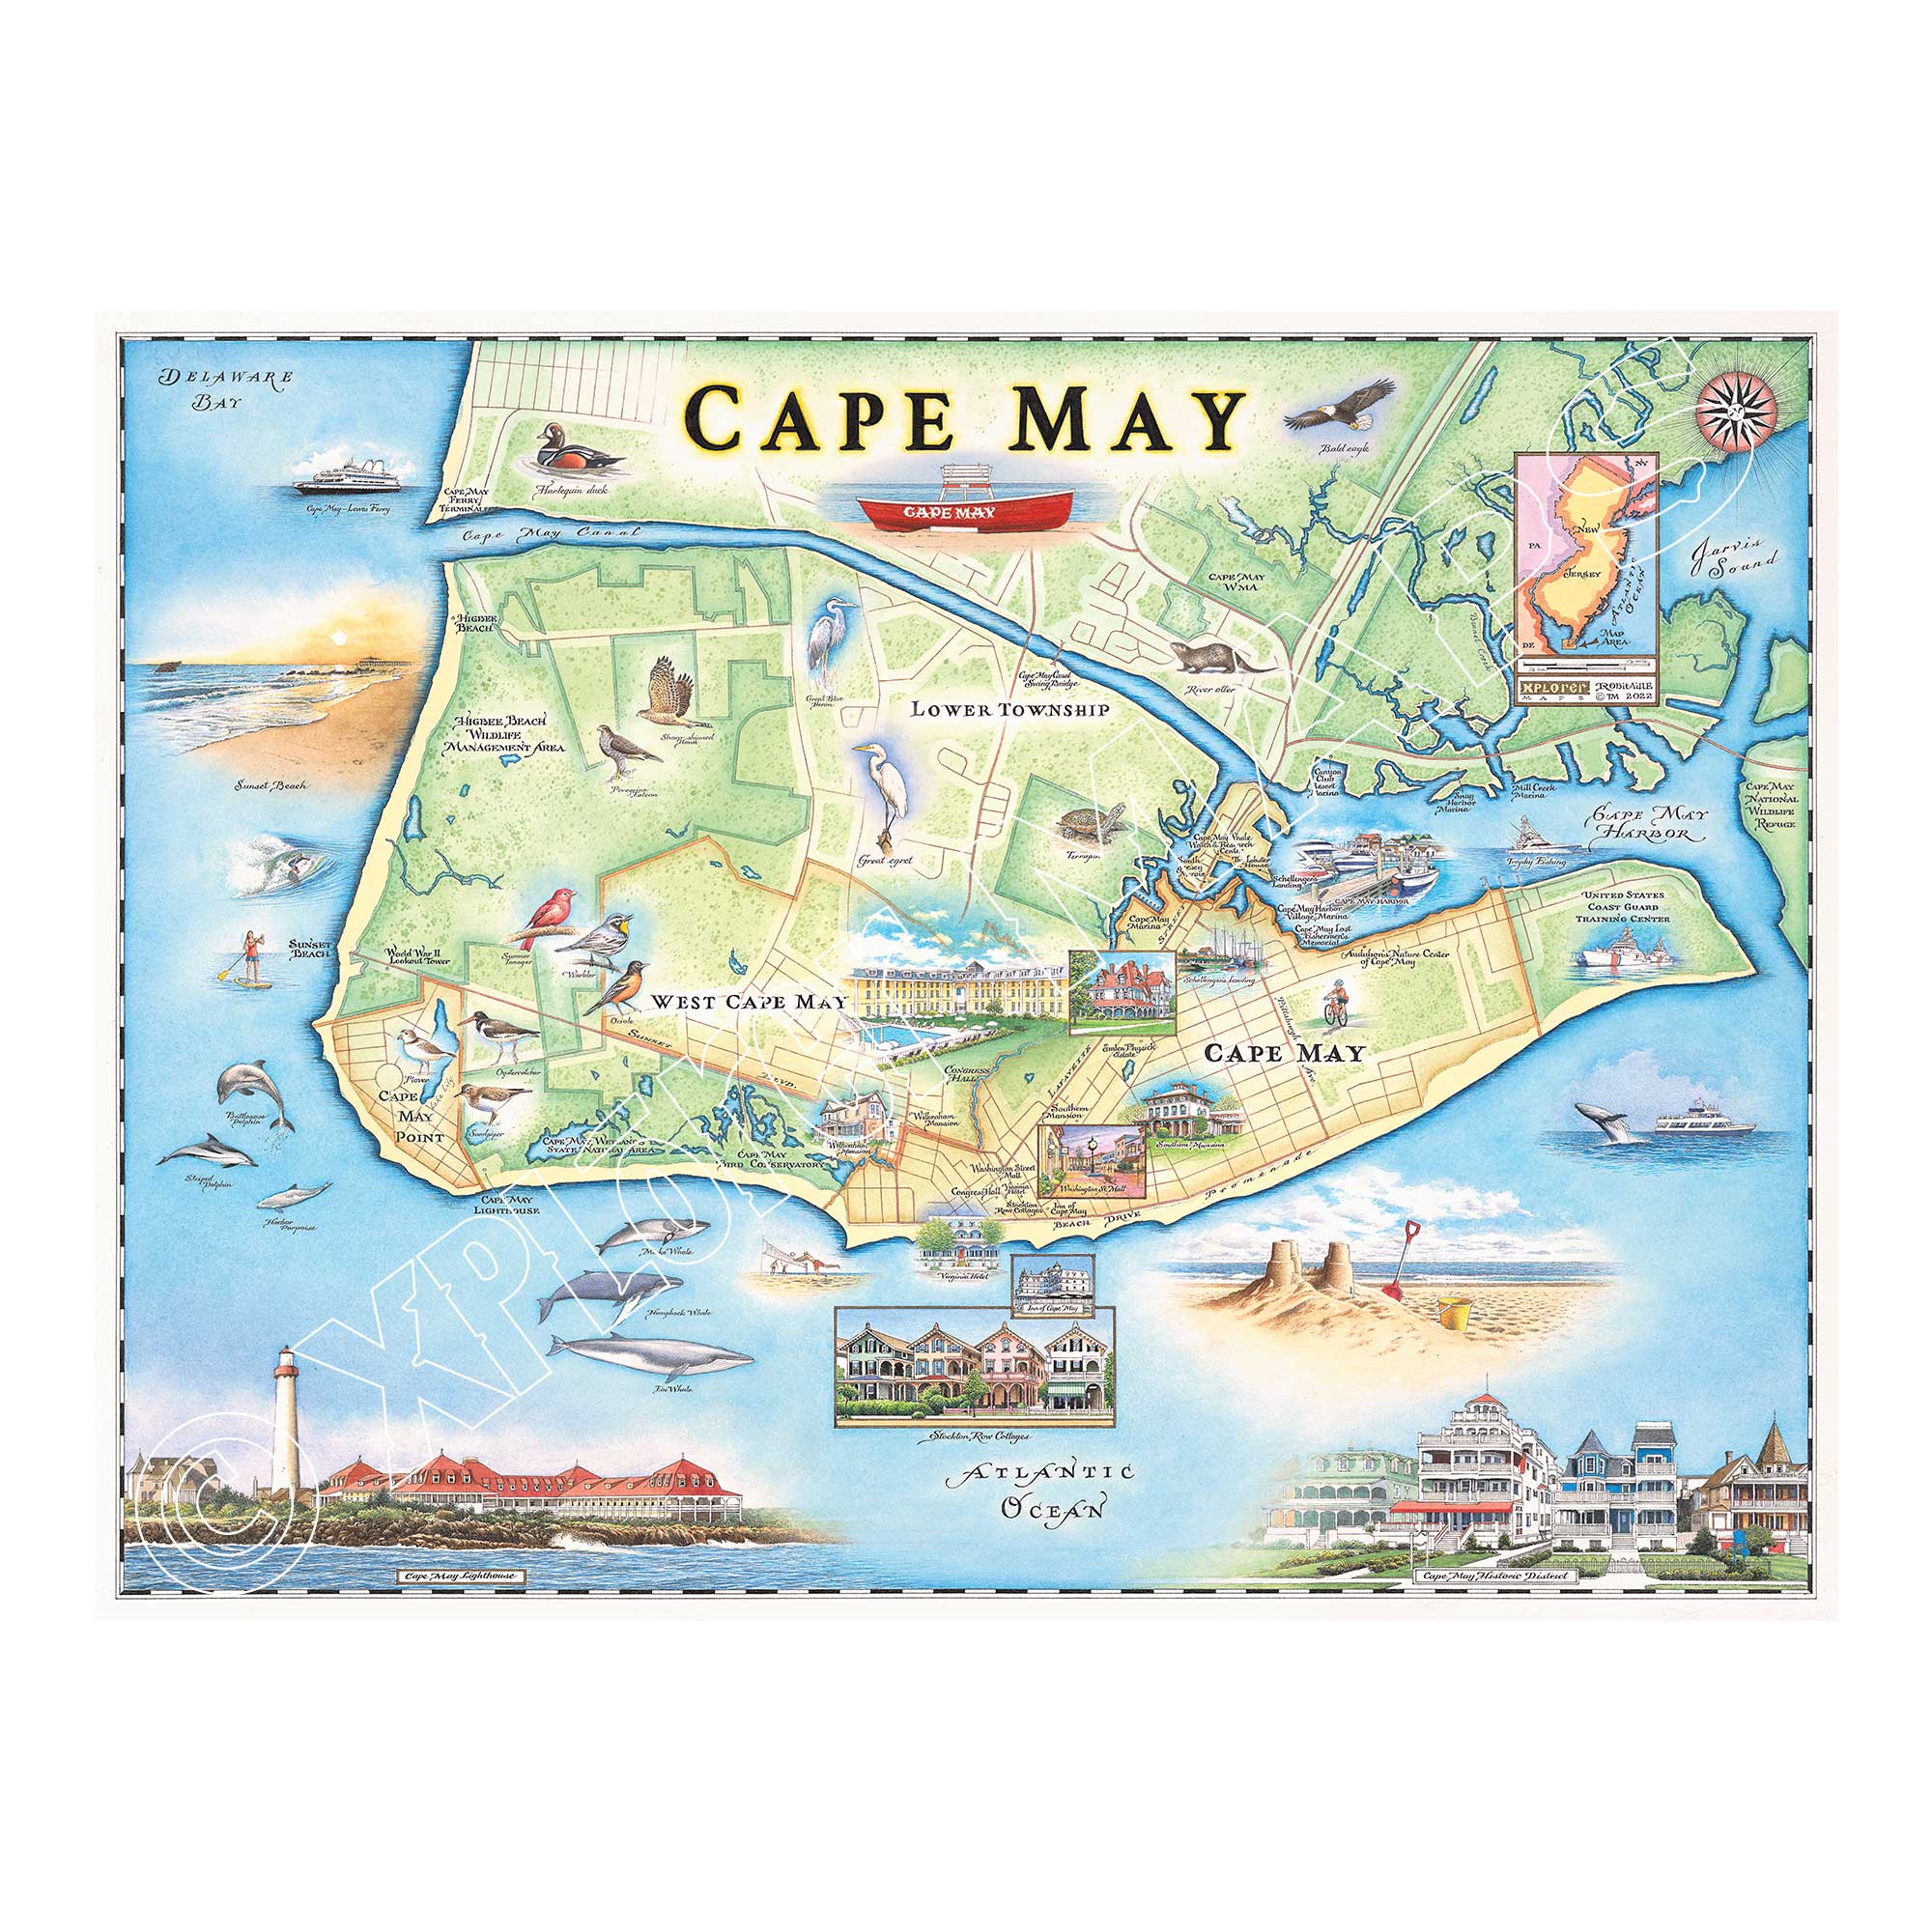 New Jersey's Cape May Hand-Drawn Map in blue and green. The map features heron and whale species, Cape May Harbor, Congress Hall, Washington St. Mall, and Cape May Bird Observatory. Measures 24x18.